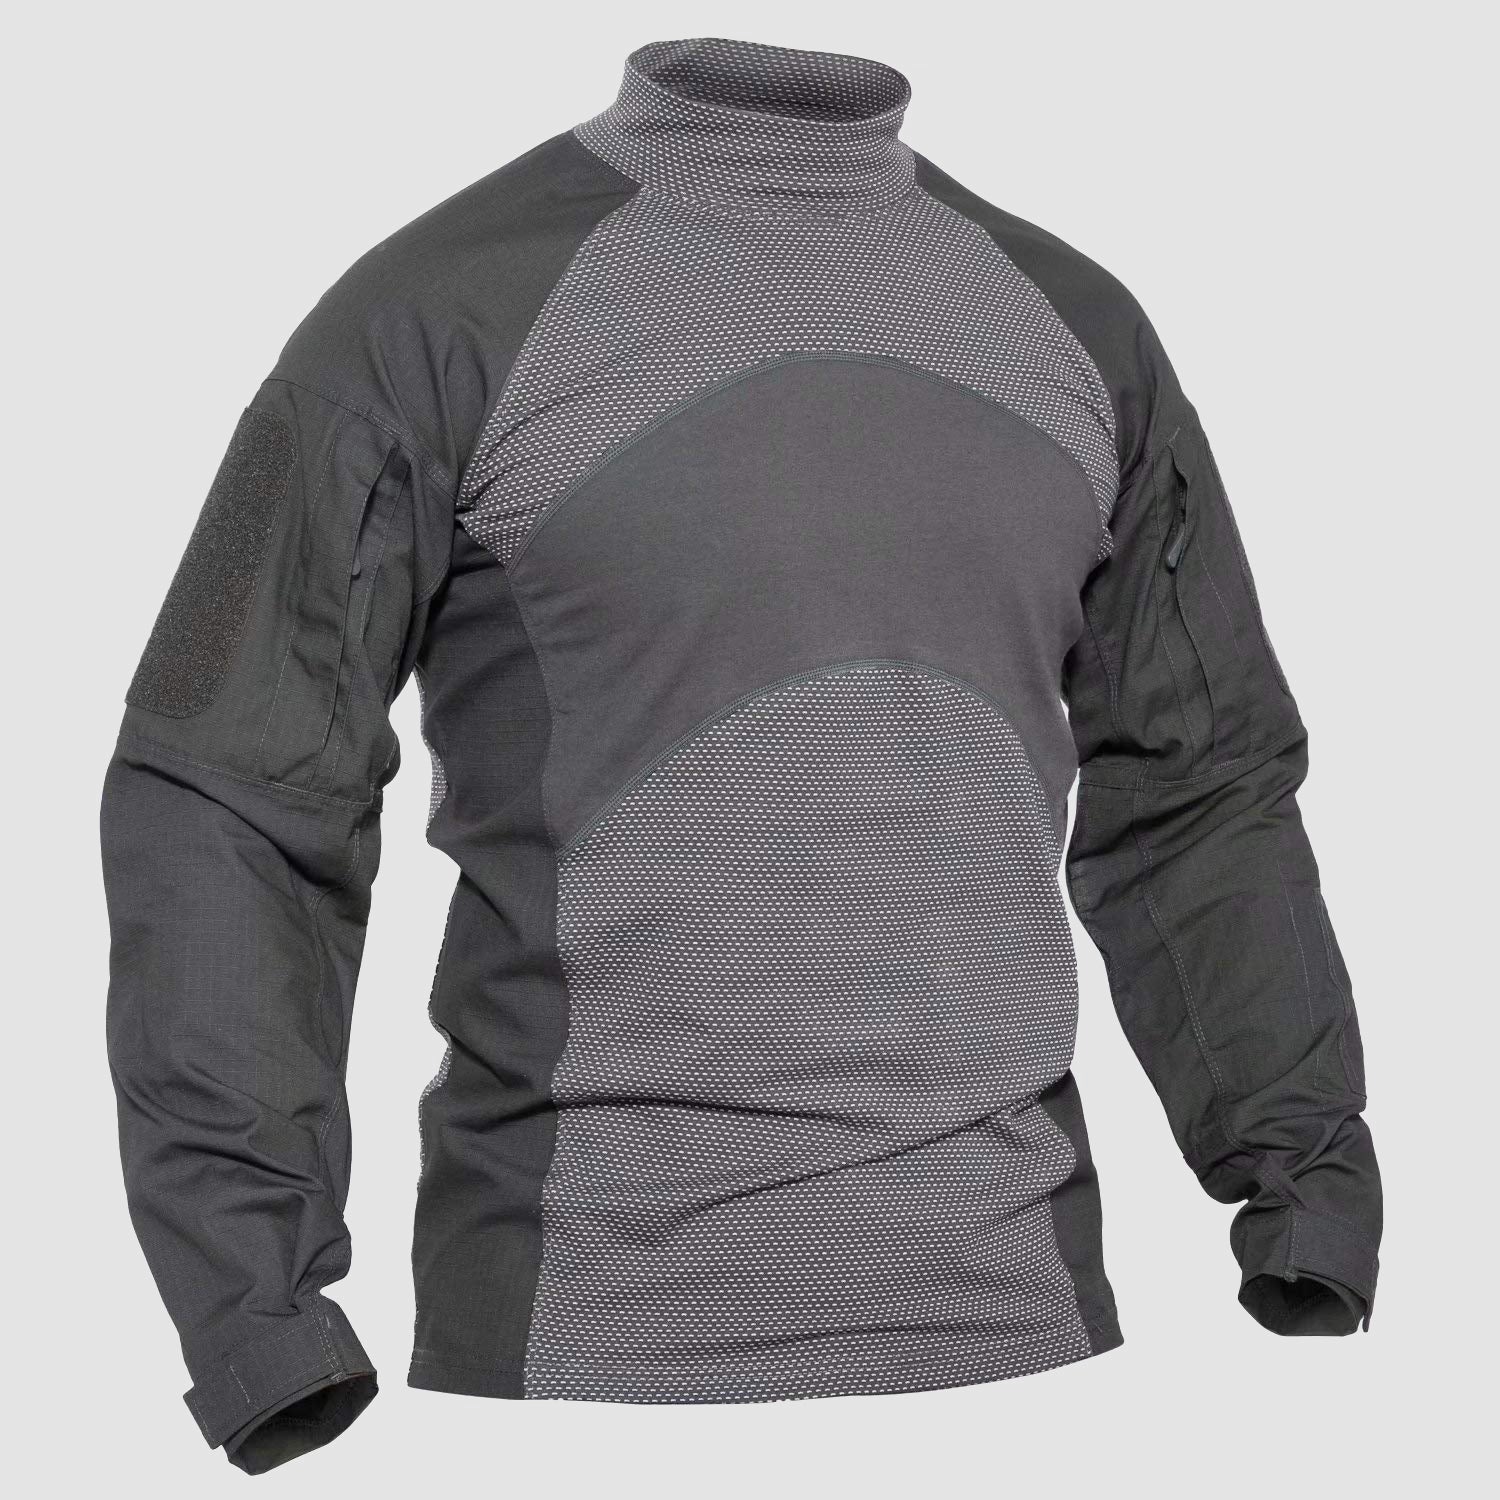 Men's Tactical Shirts Long Sleeve Military Combat Shirts with Pockets